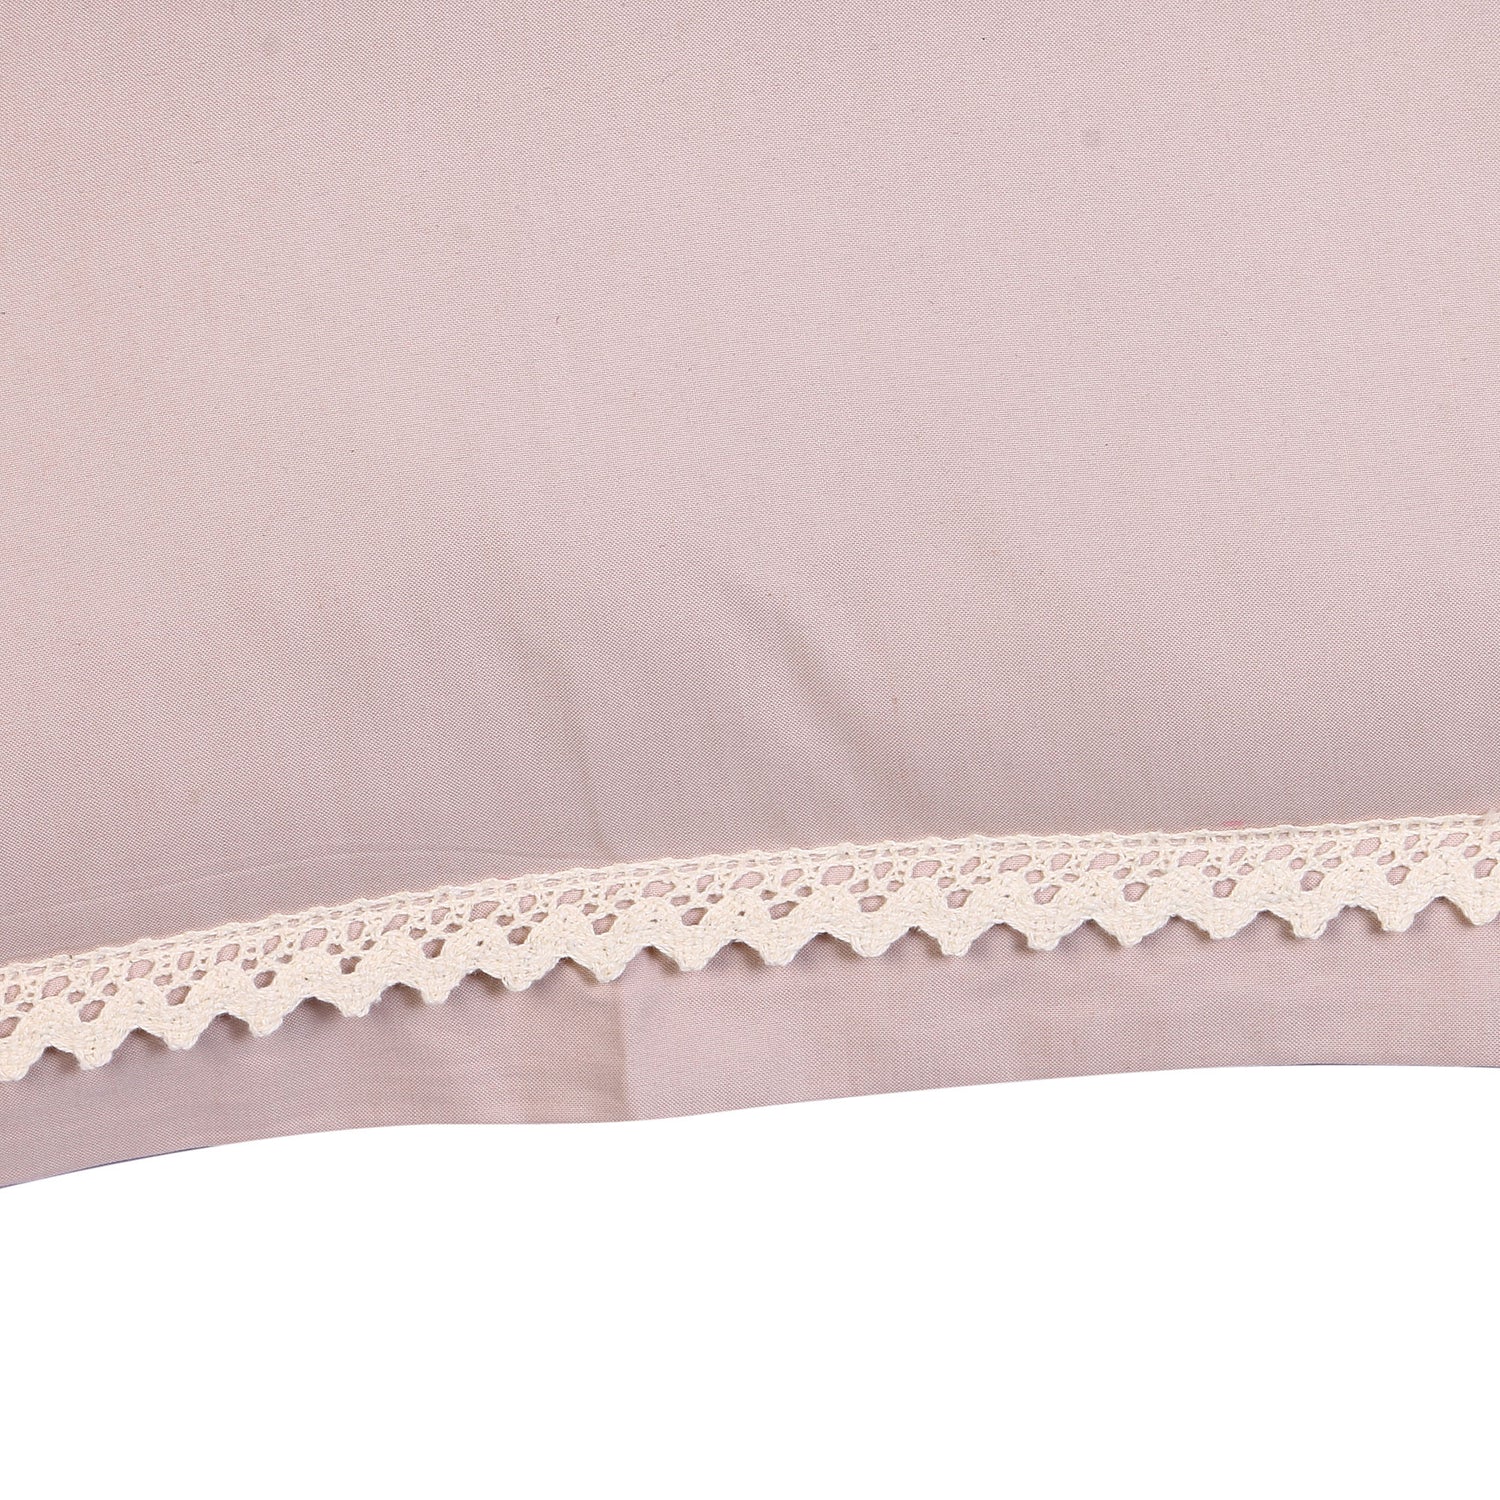 V2G Plain Color Pillow Covers-Pinkish Brown with Lace- Pair